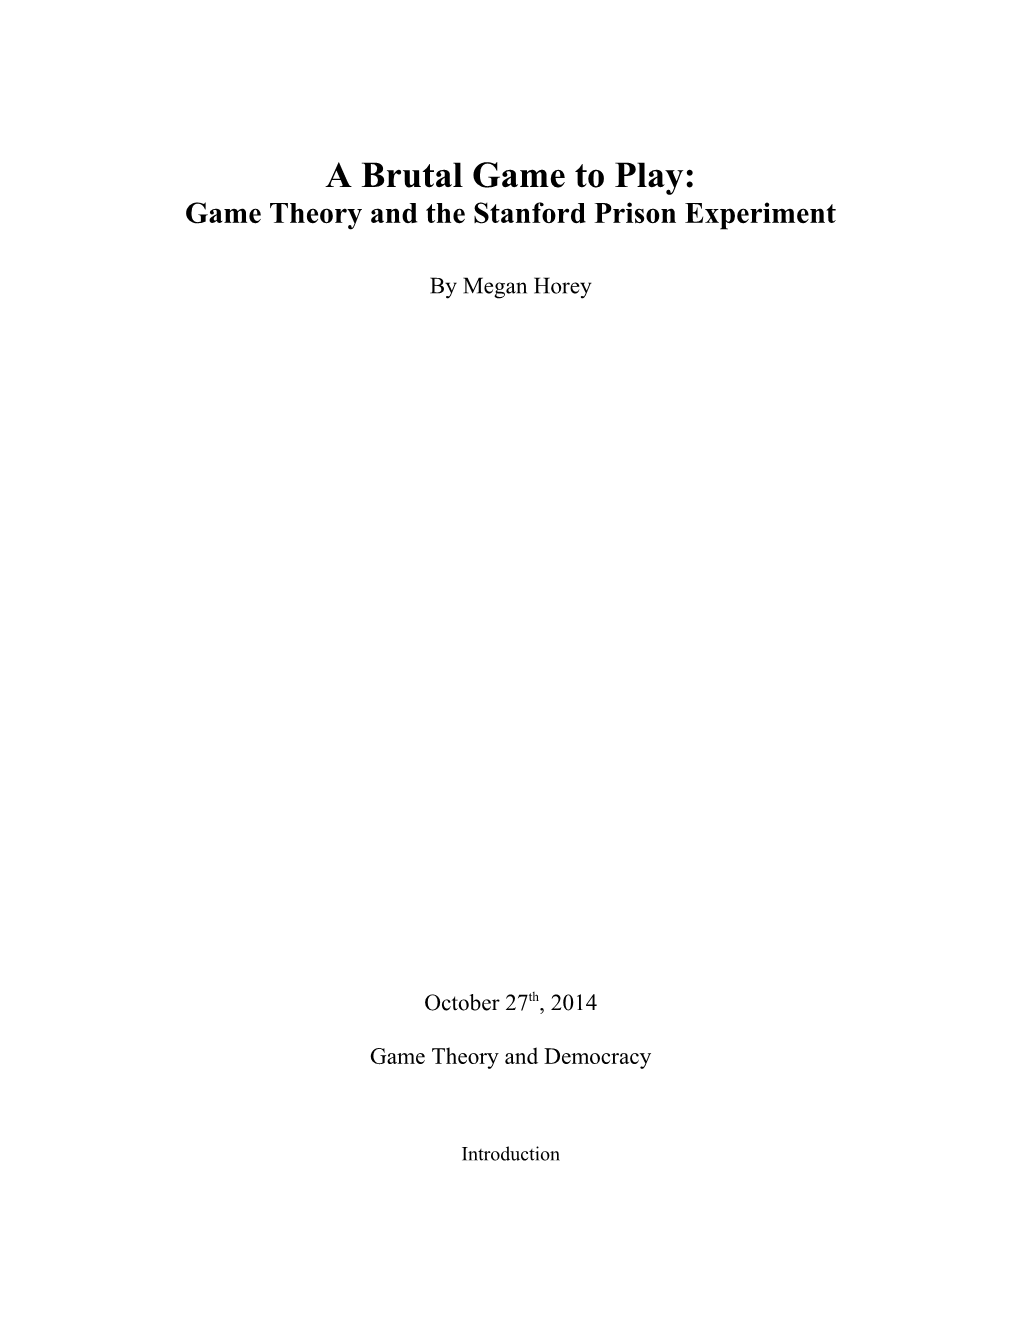 Game Theory and the Stanford Prison Experiment